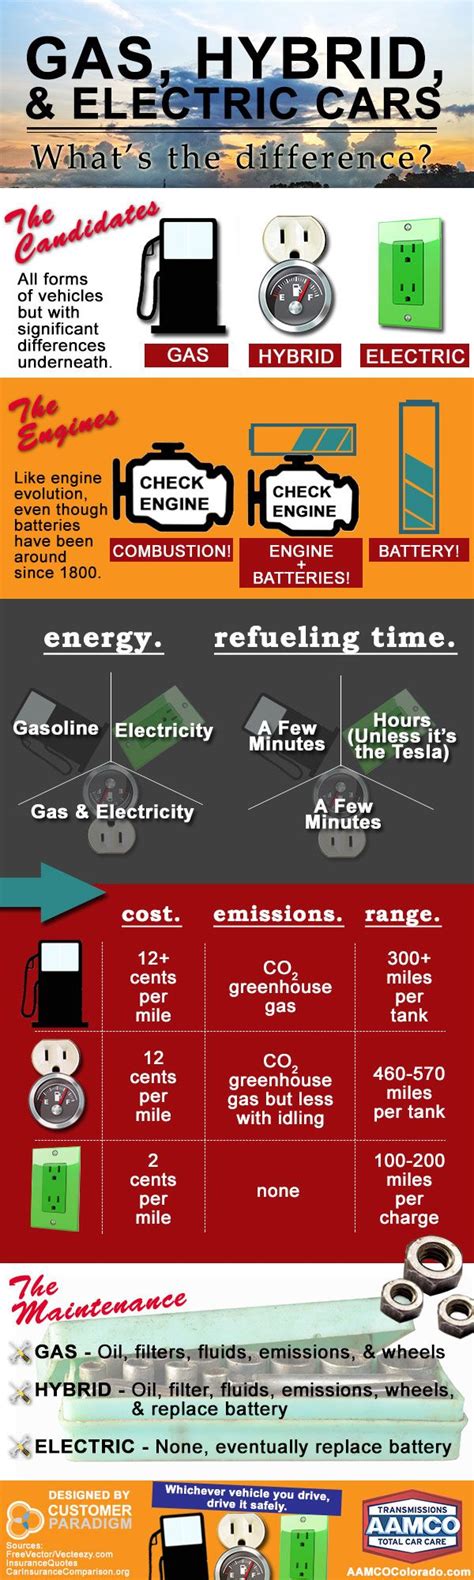 How are they being driven? Gas vs. Hybrid vs. Electric Cars - INFOGRAPHIC | AAMCO ...